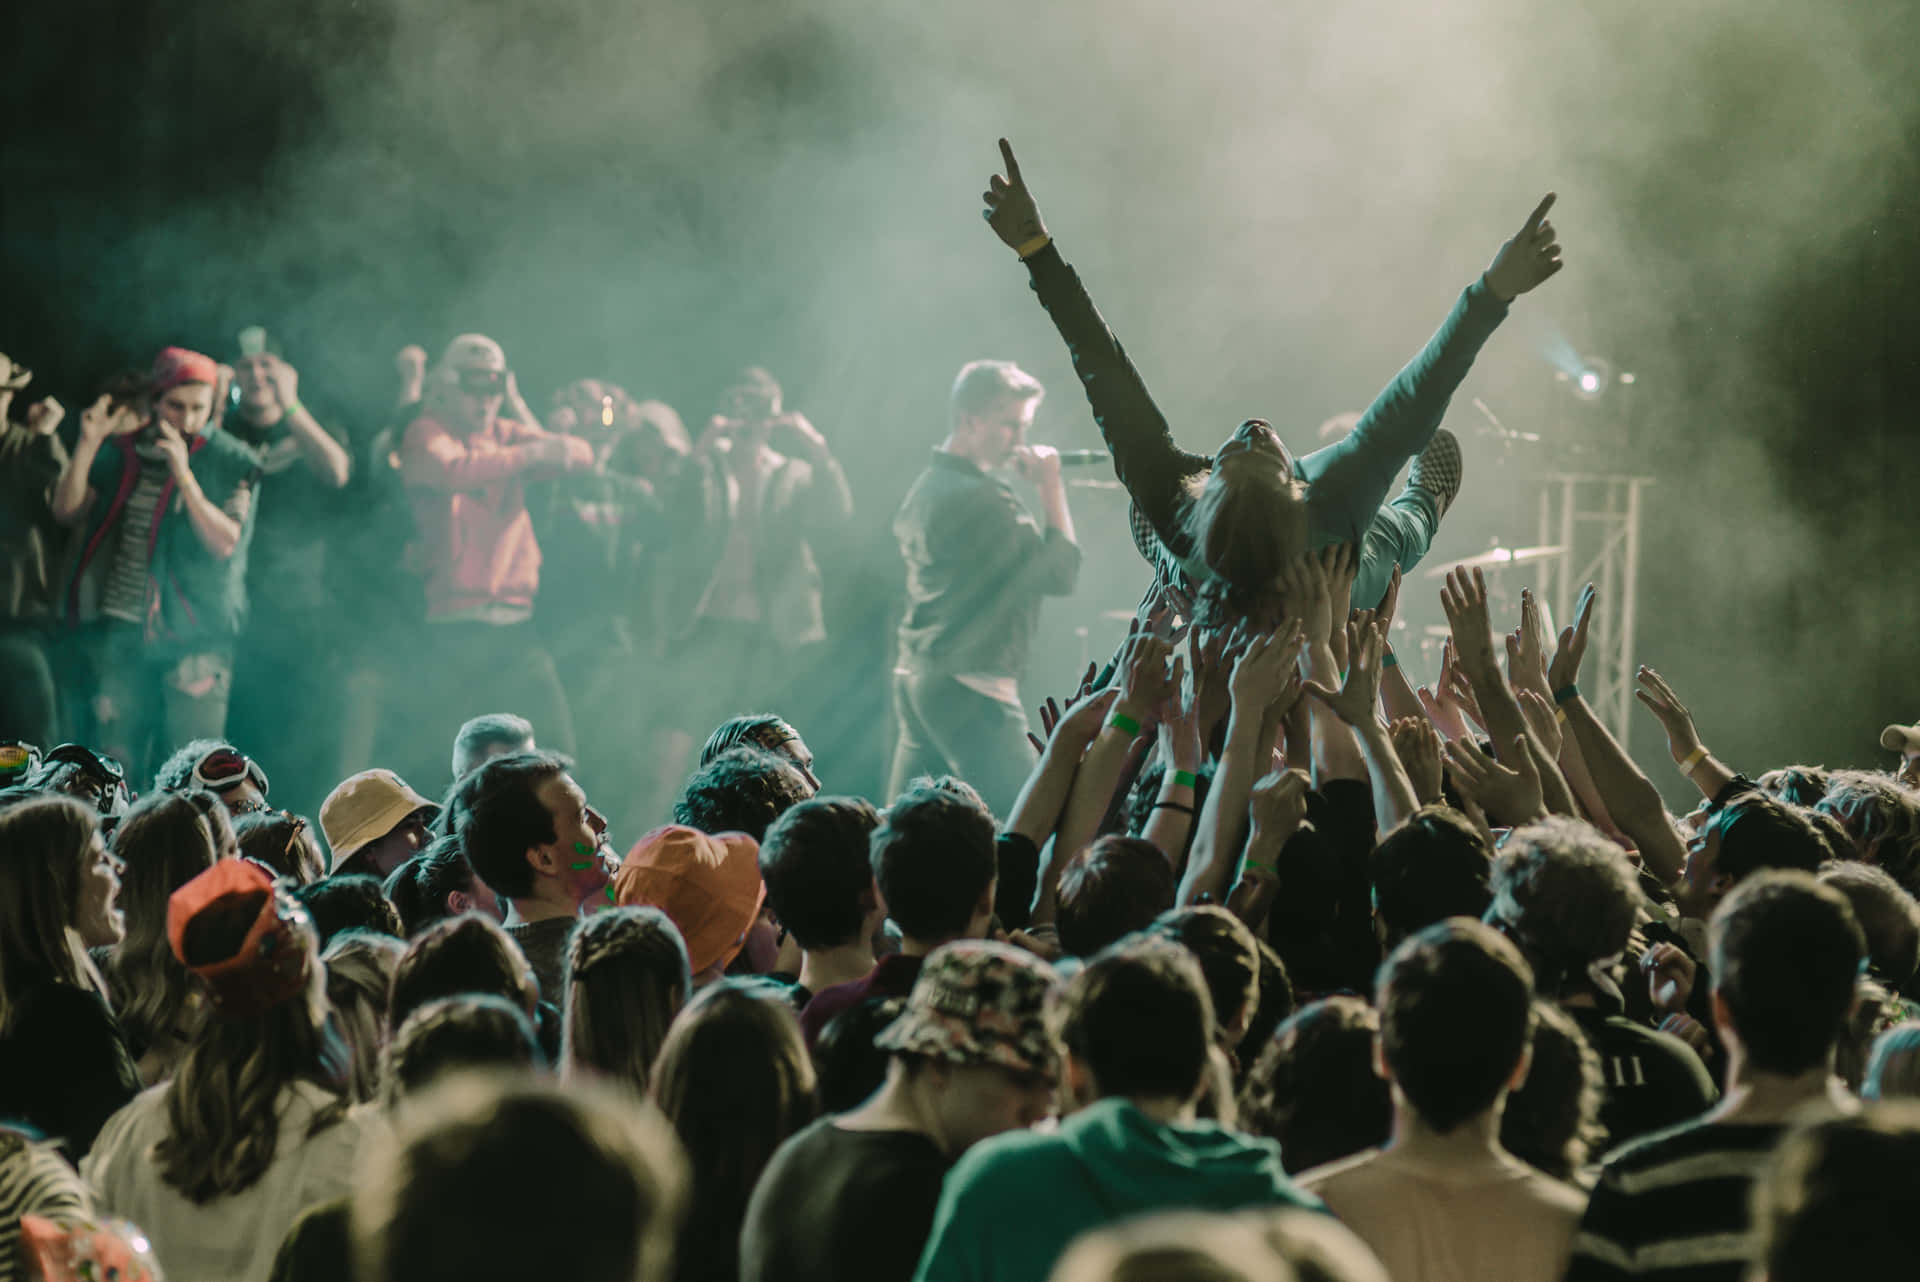 Energetic crowd enjoying a live performance at a music festival Wallpaper